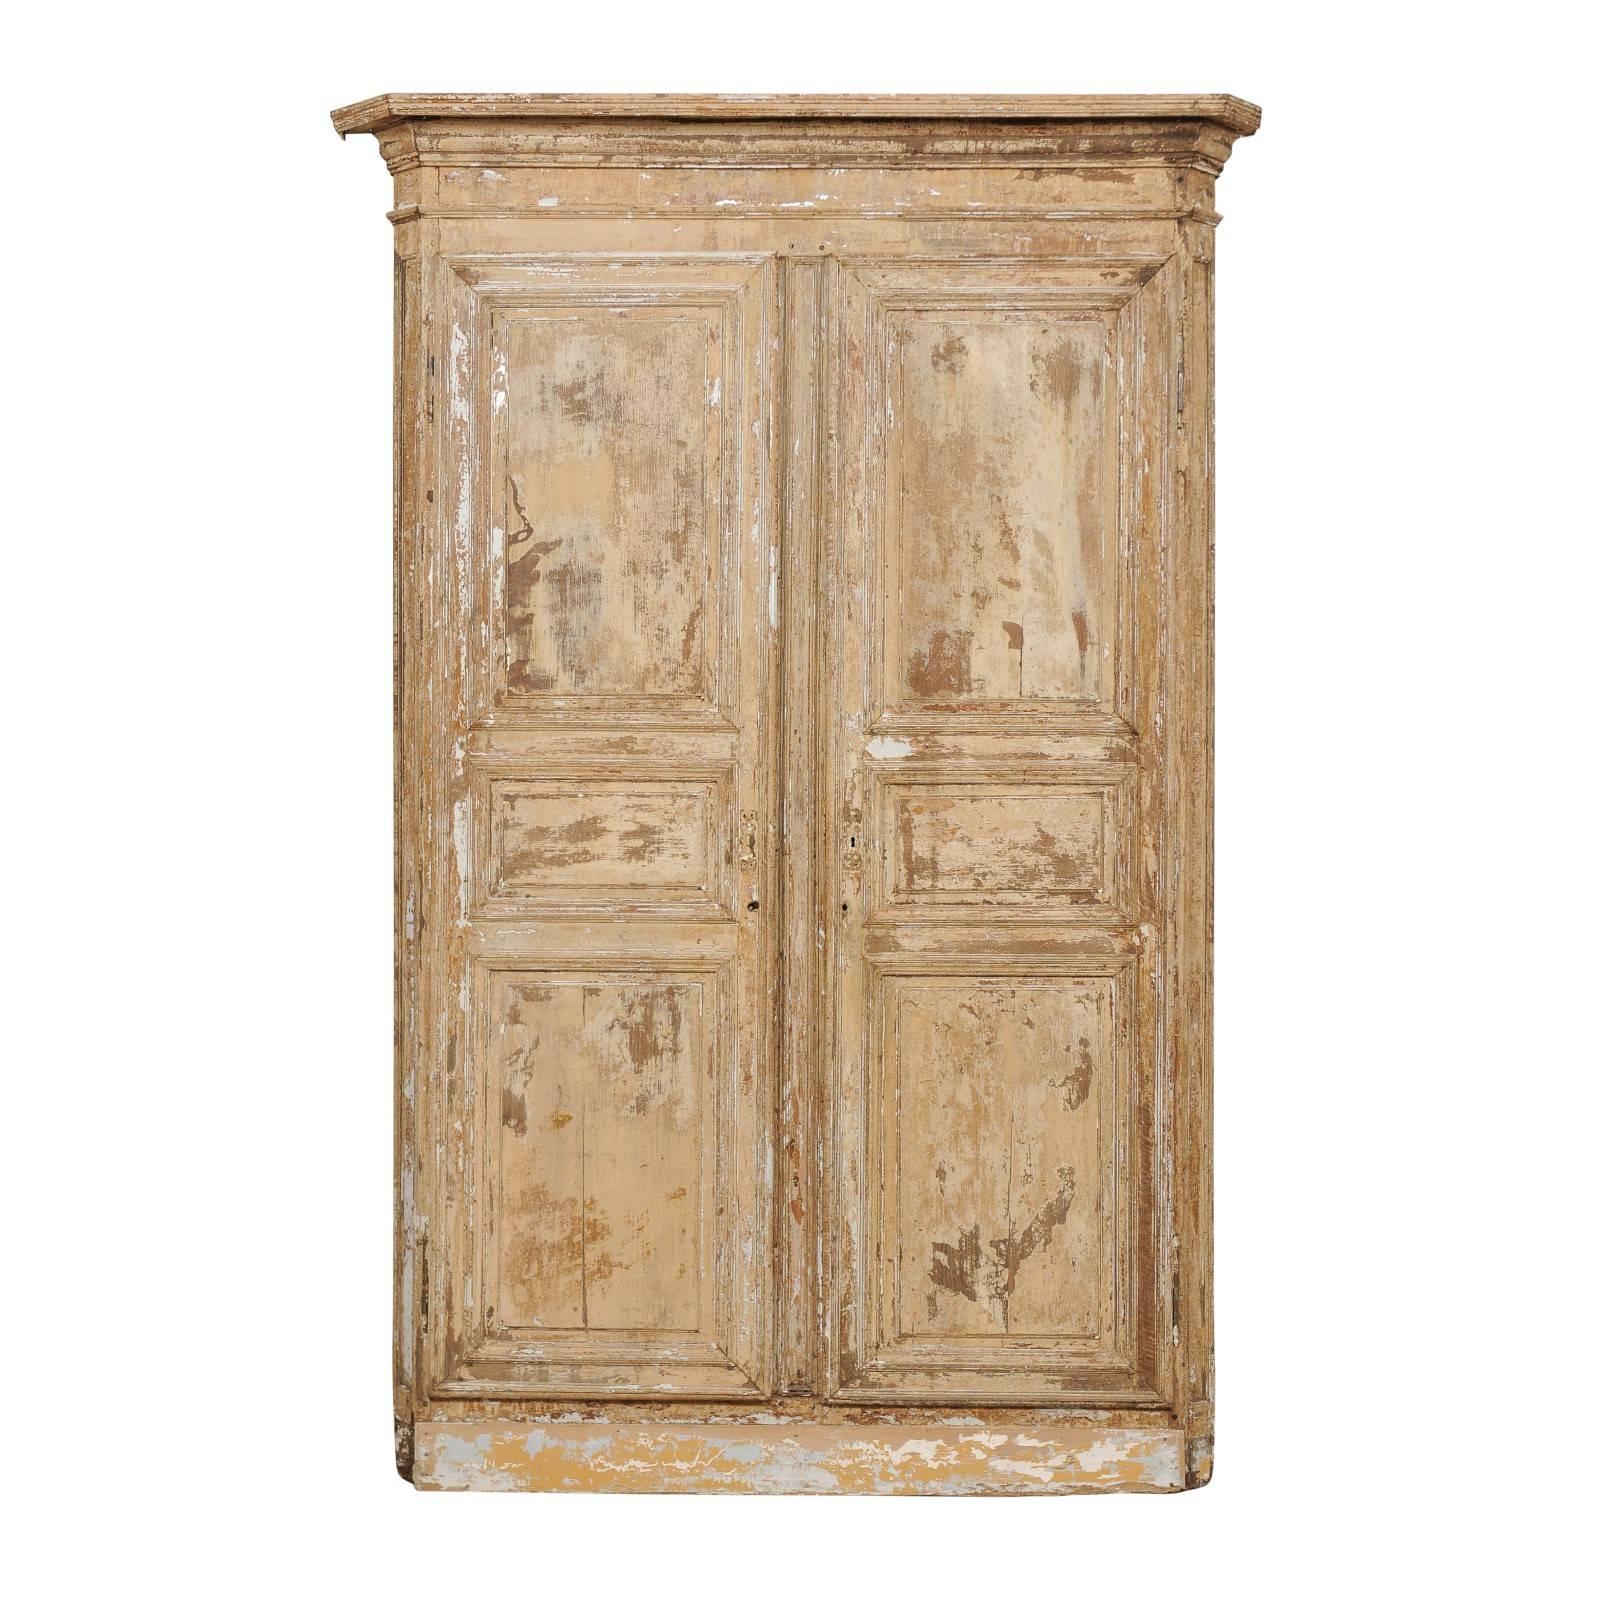 An Italian Pair of Early 19th C. Wood Doors Within Original Casing & Molding